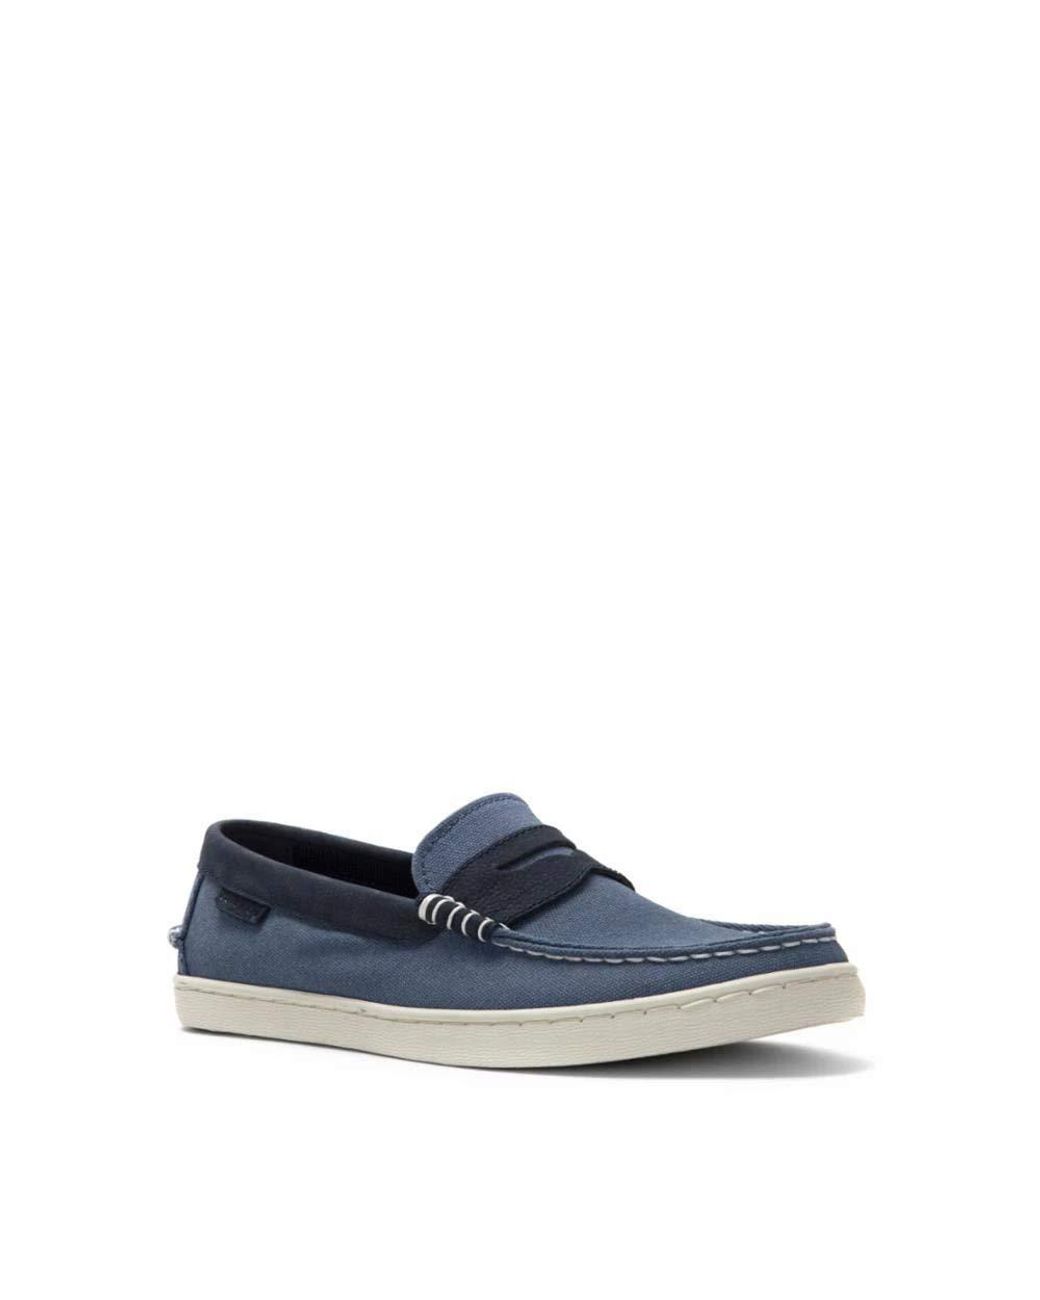 Cole Haan Suede Pinch Weekender Loafer in Blue for Men - Save 11% - Lyst